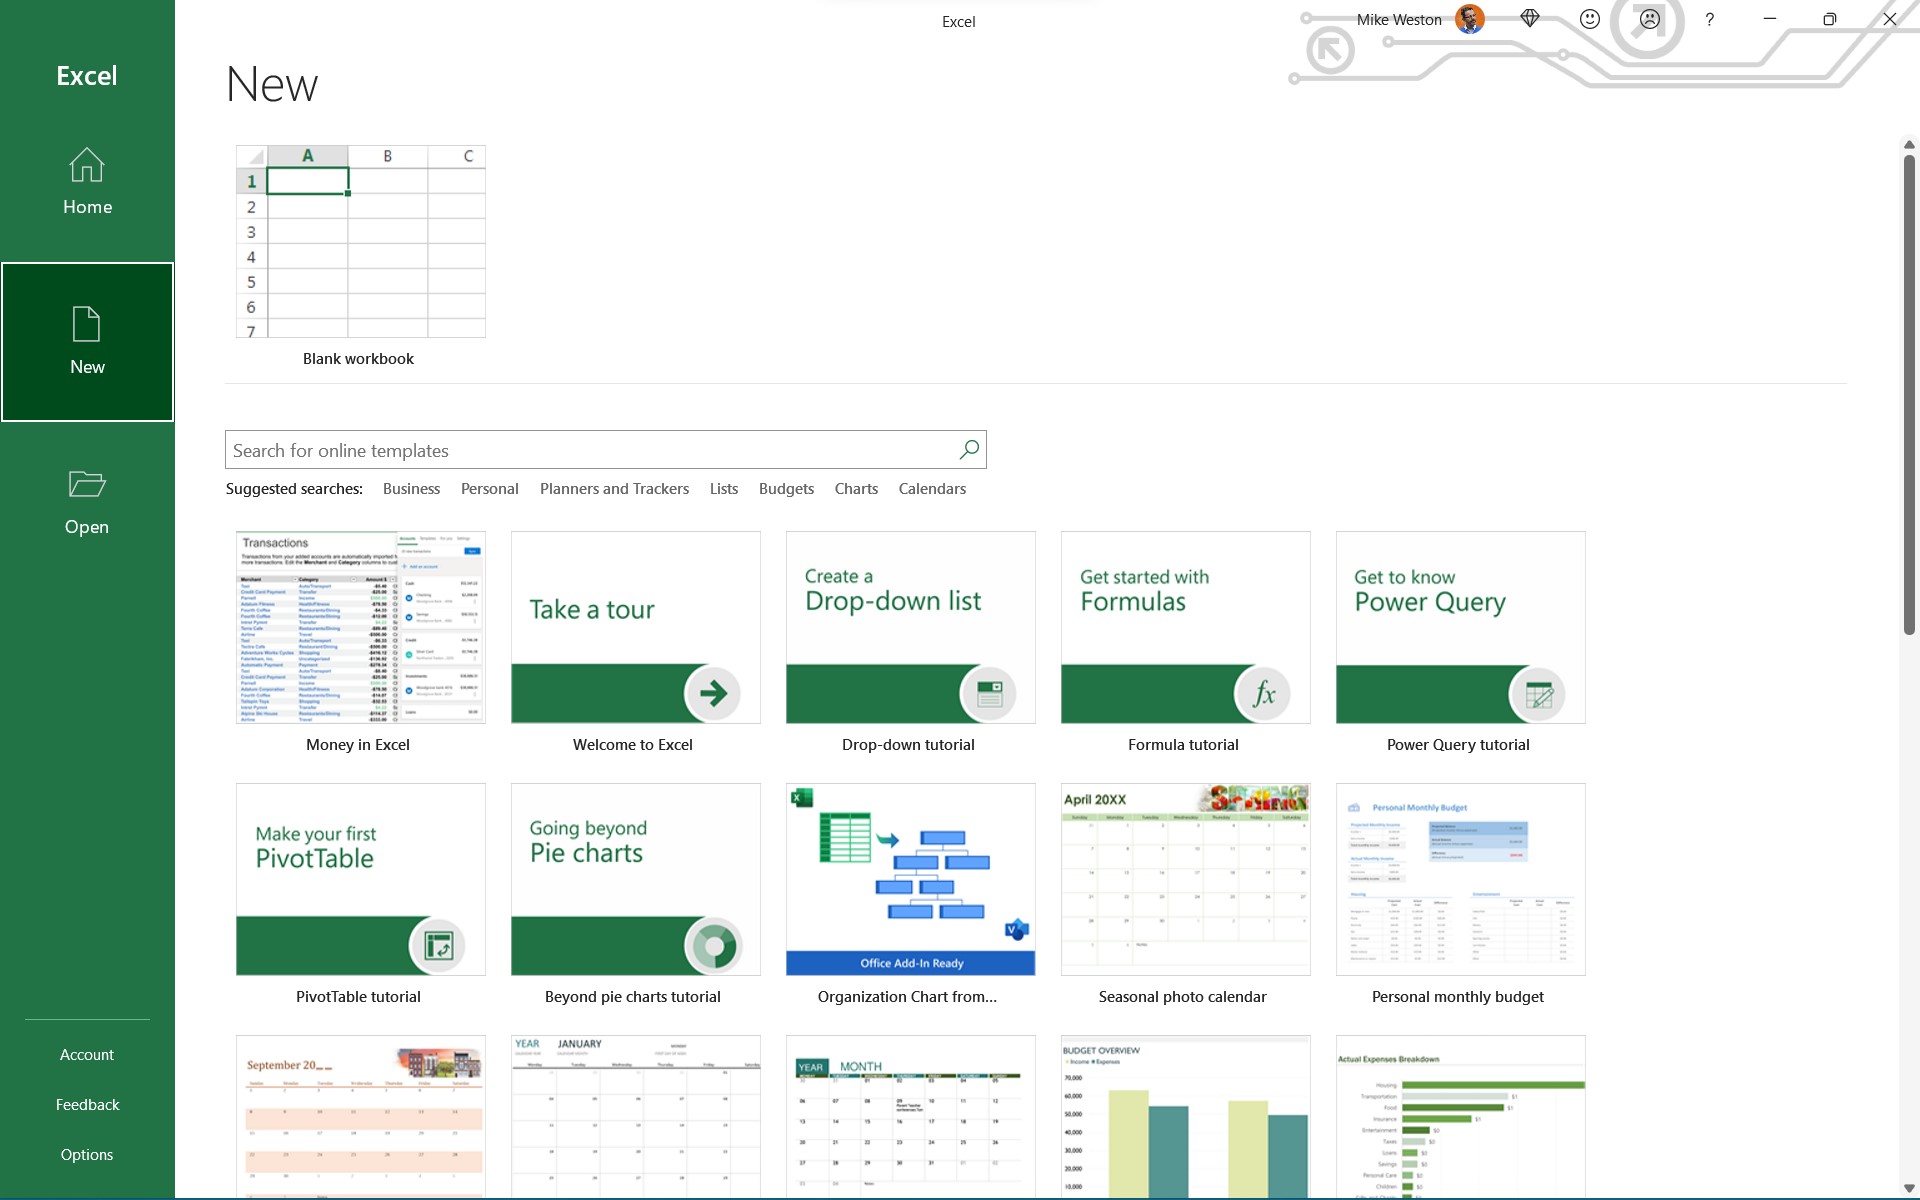 The “New” page showing a wide range of Excel templates.